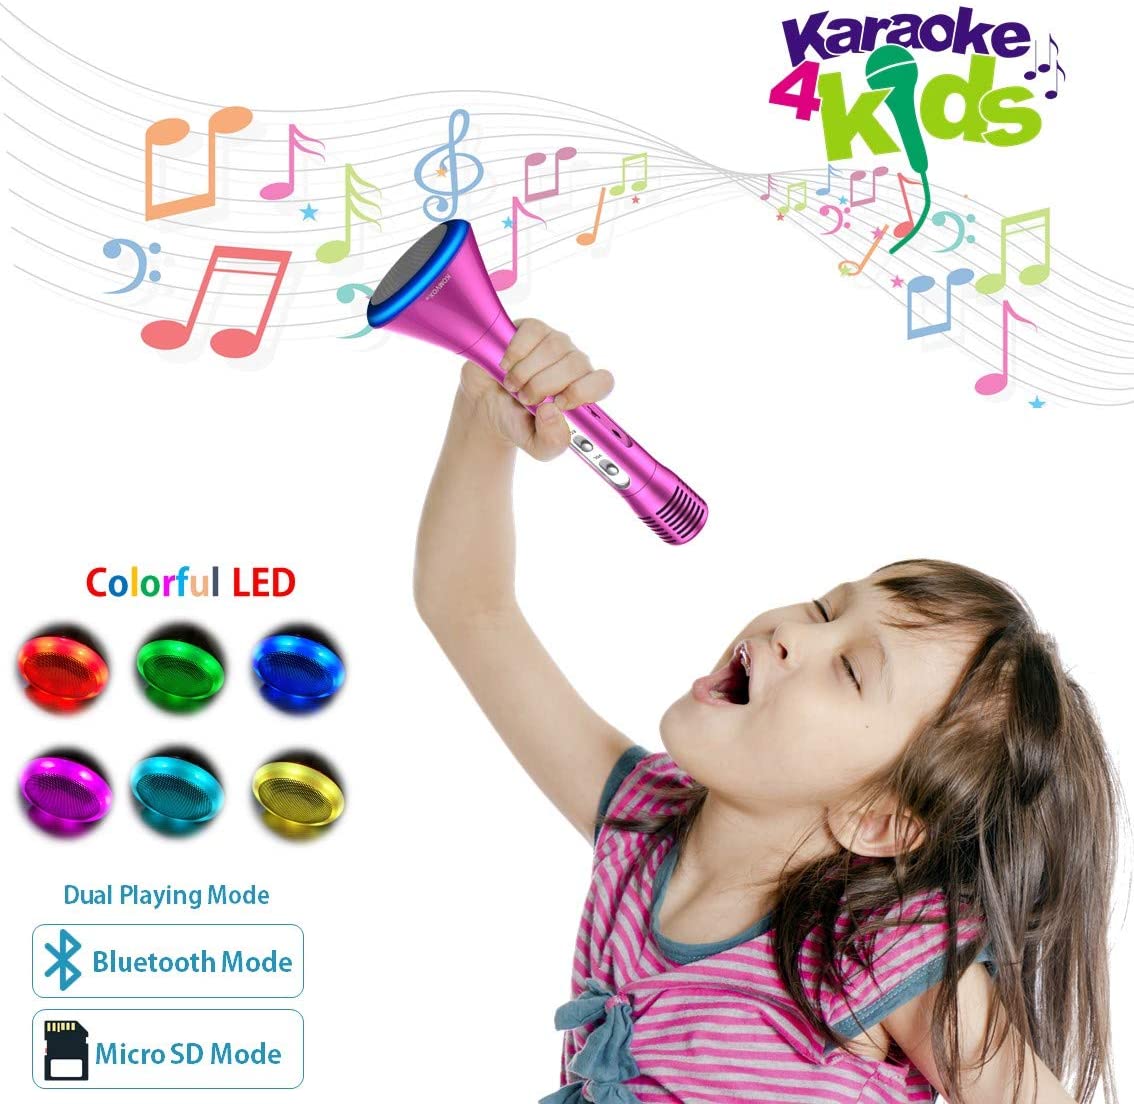 Kids Karaoke Microphone for Children, Kids Microphone with Bluetooth Speaker, Wireless Karaoke Microphone, Karaoke Singing Machine Toy for Adult Home Party Music Singing Playing, Christmas Birthday Gifts for Girl Toys